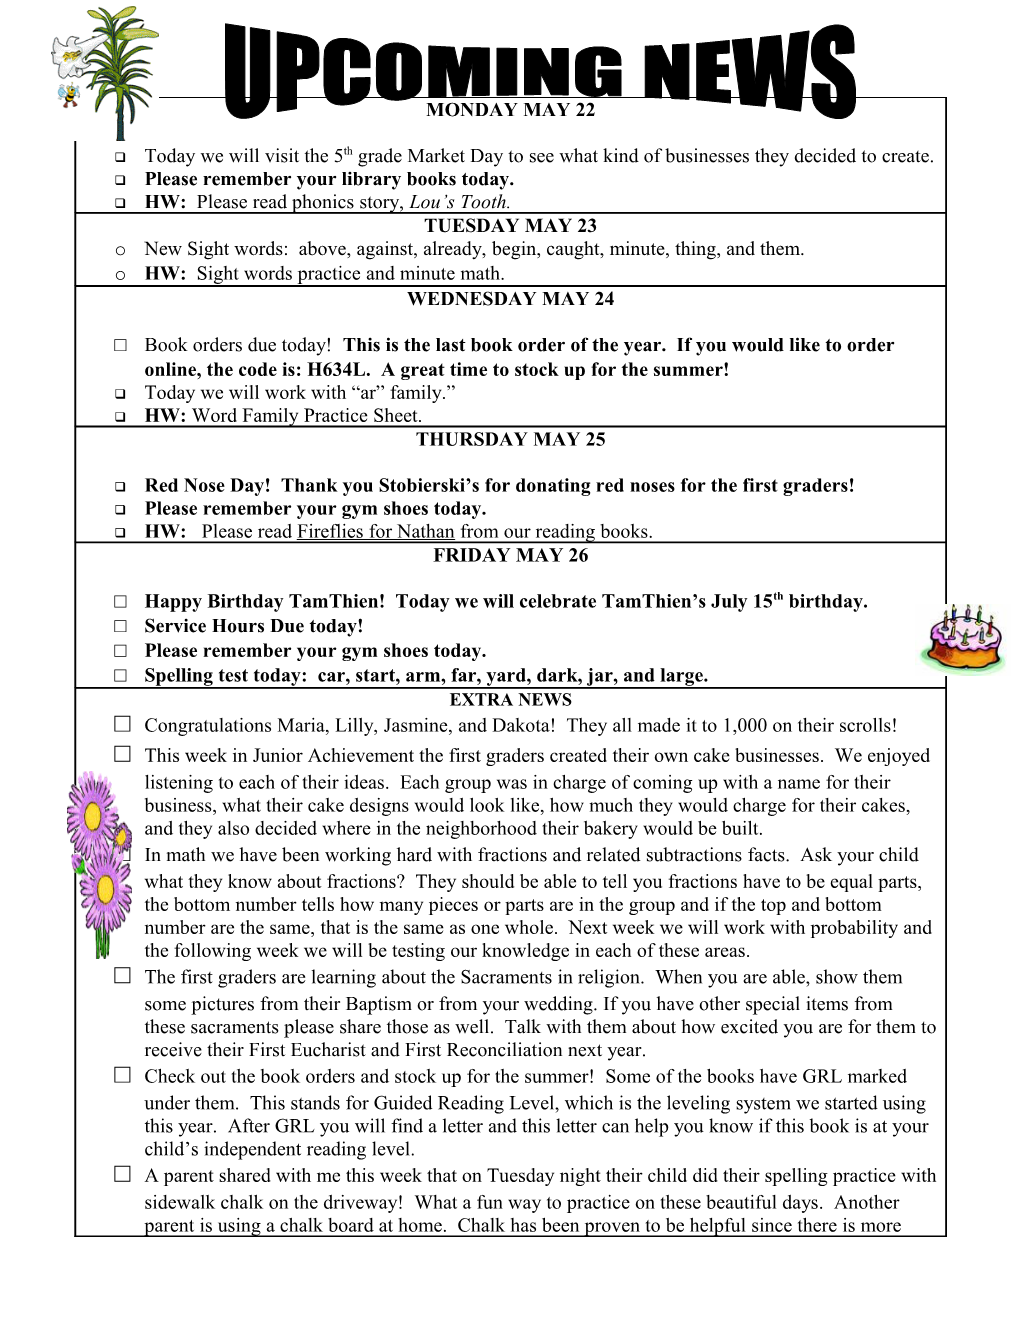 HW: Sight Words Practice and Minute Math